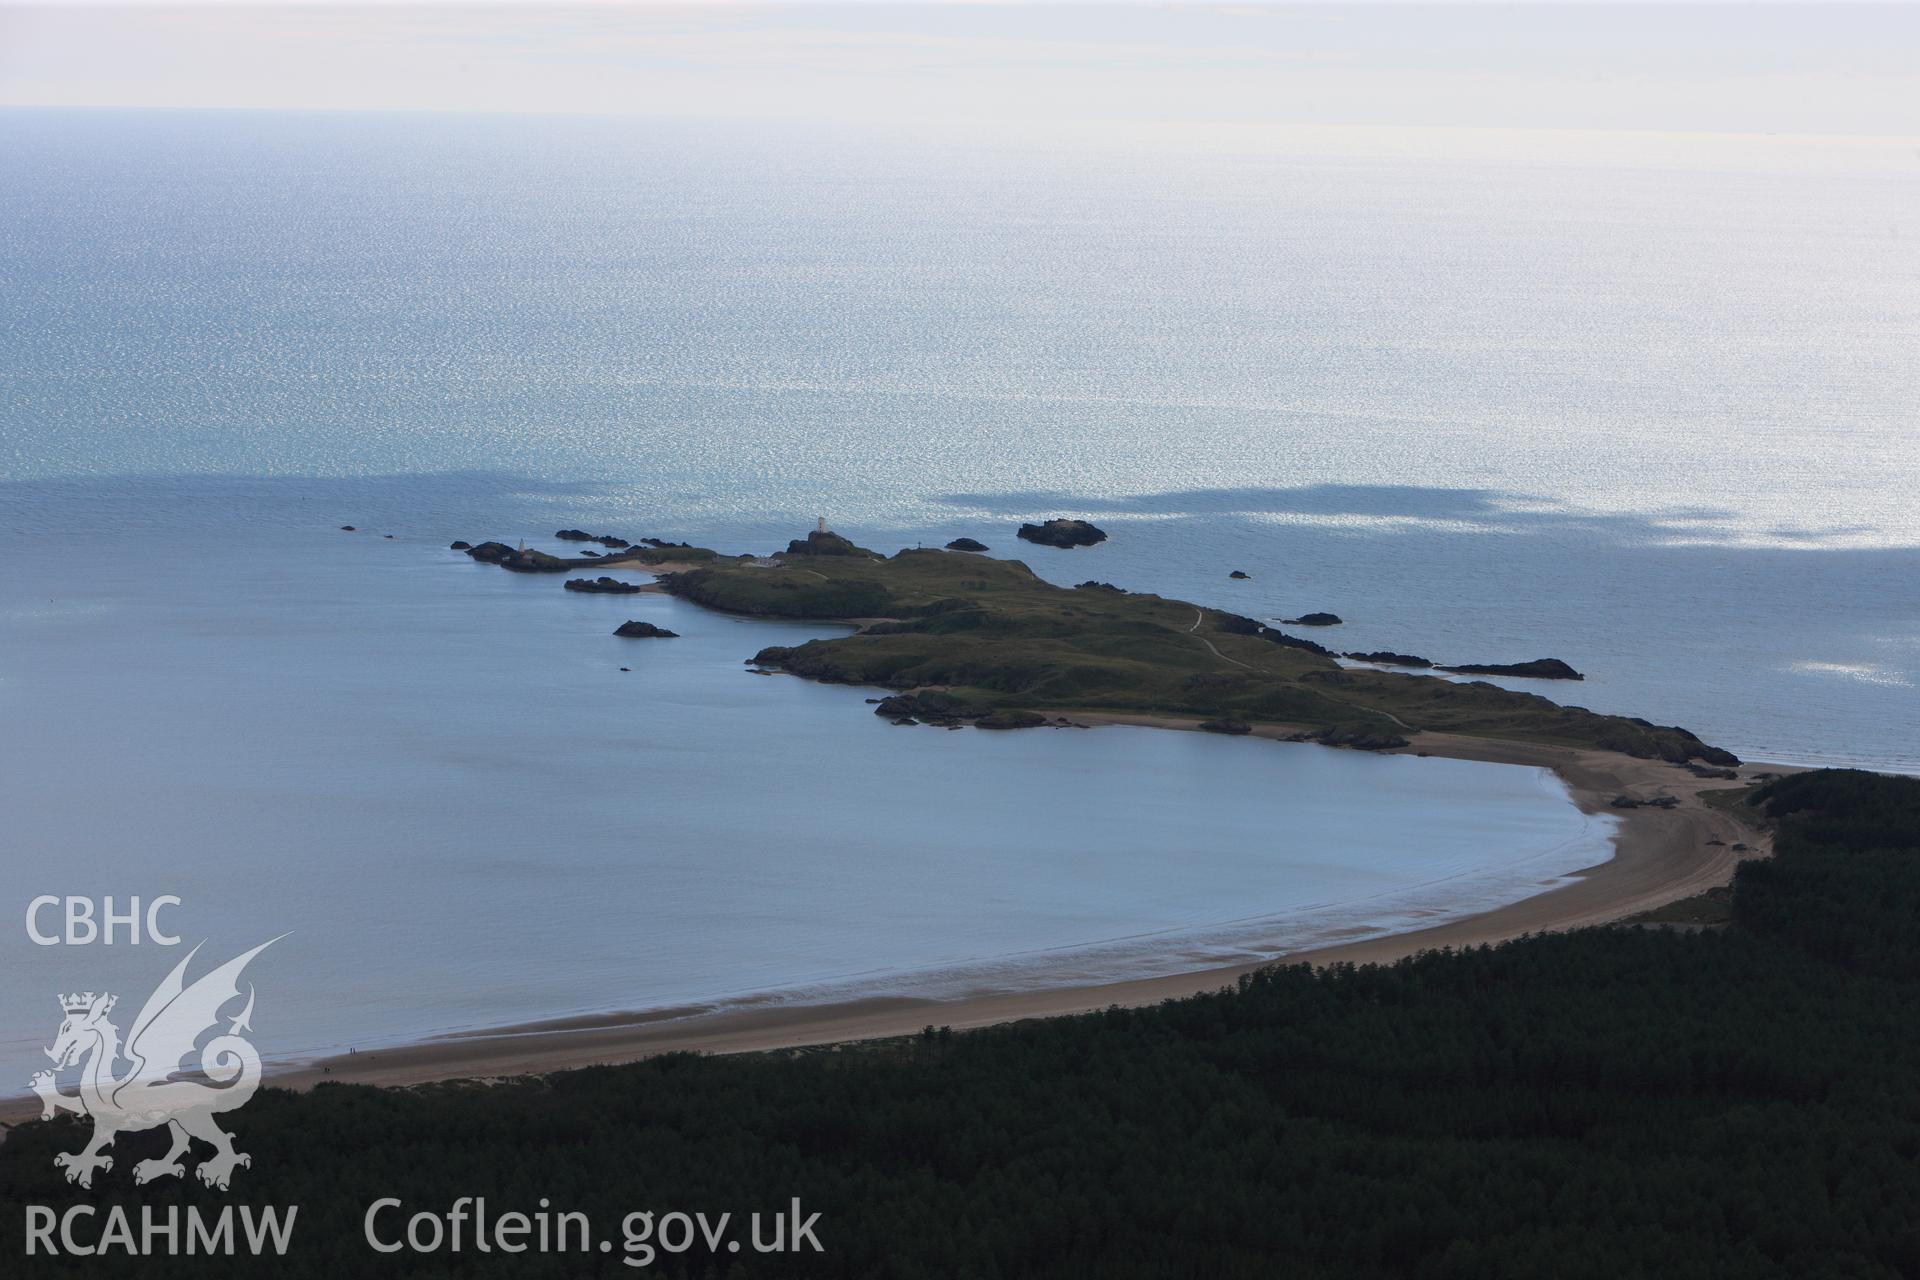 RCAHMW colour oblique photograph of Llanddwyn Island and lighthouse, view from east. Taken by Toby Driver on 20/07/2011.